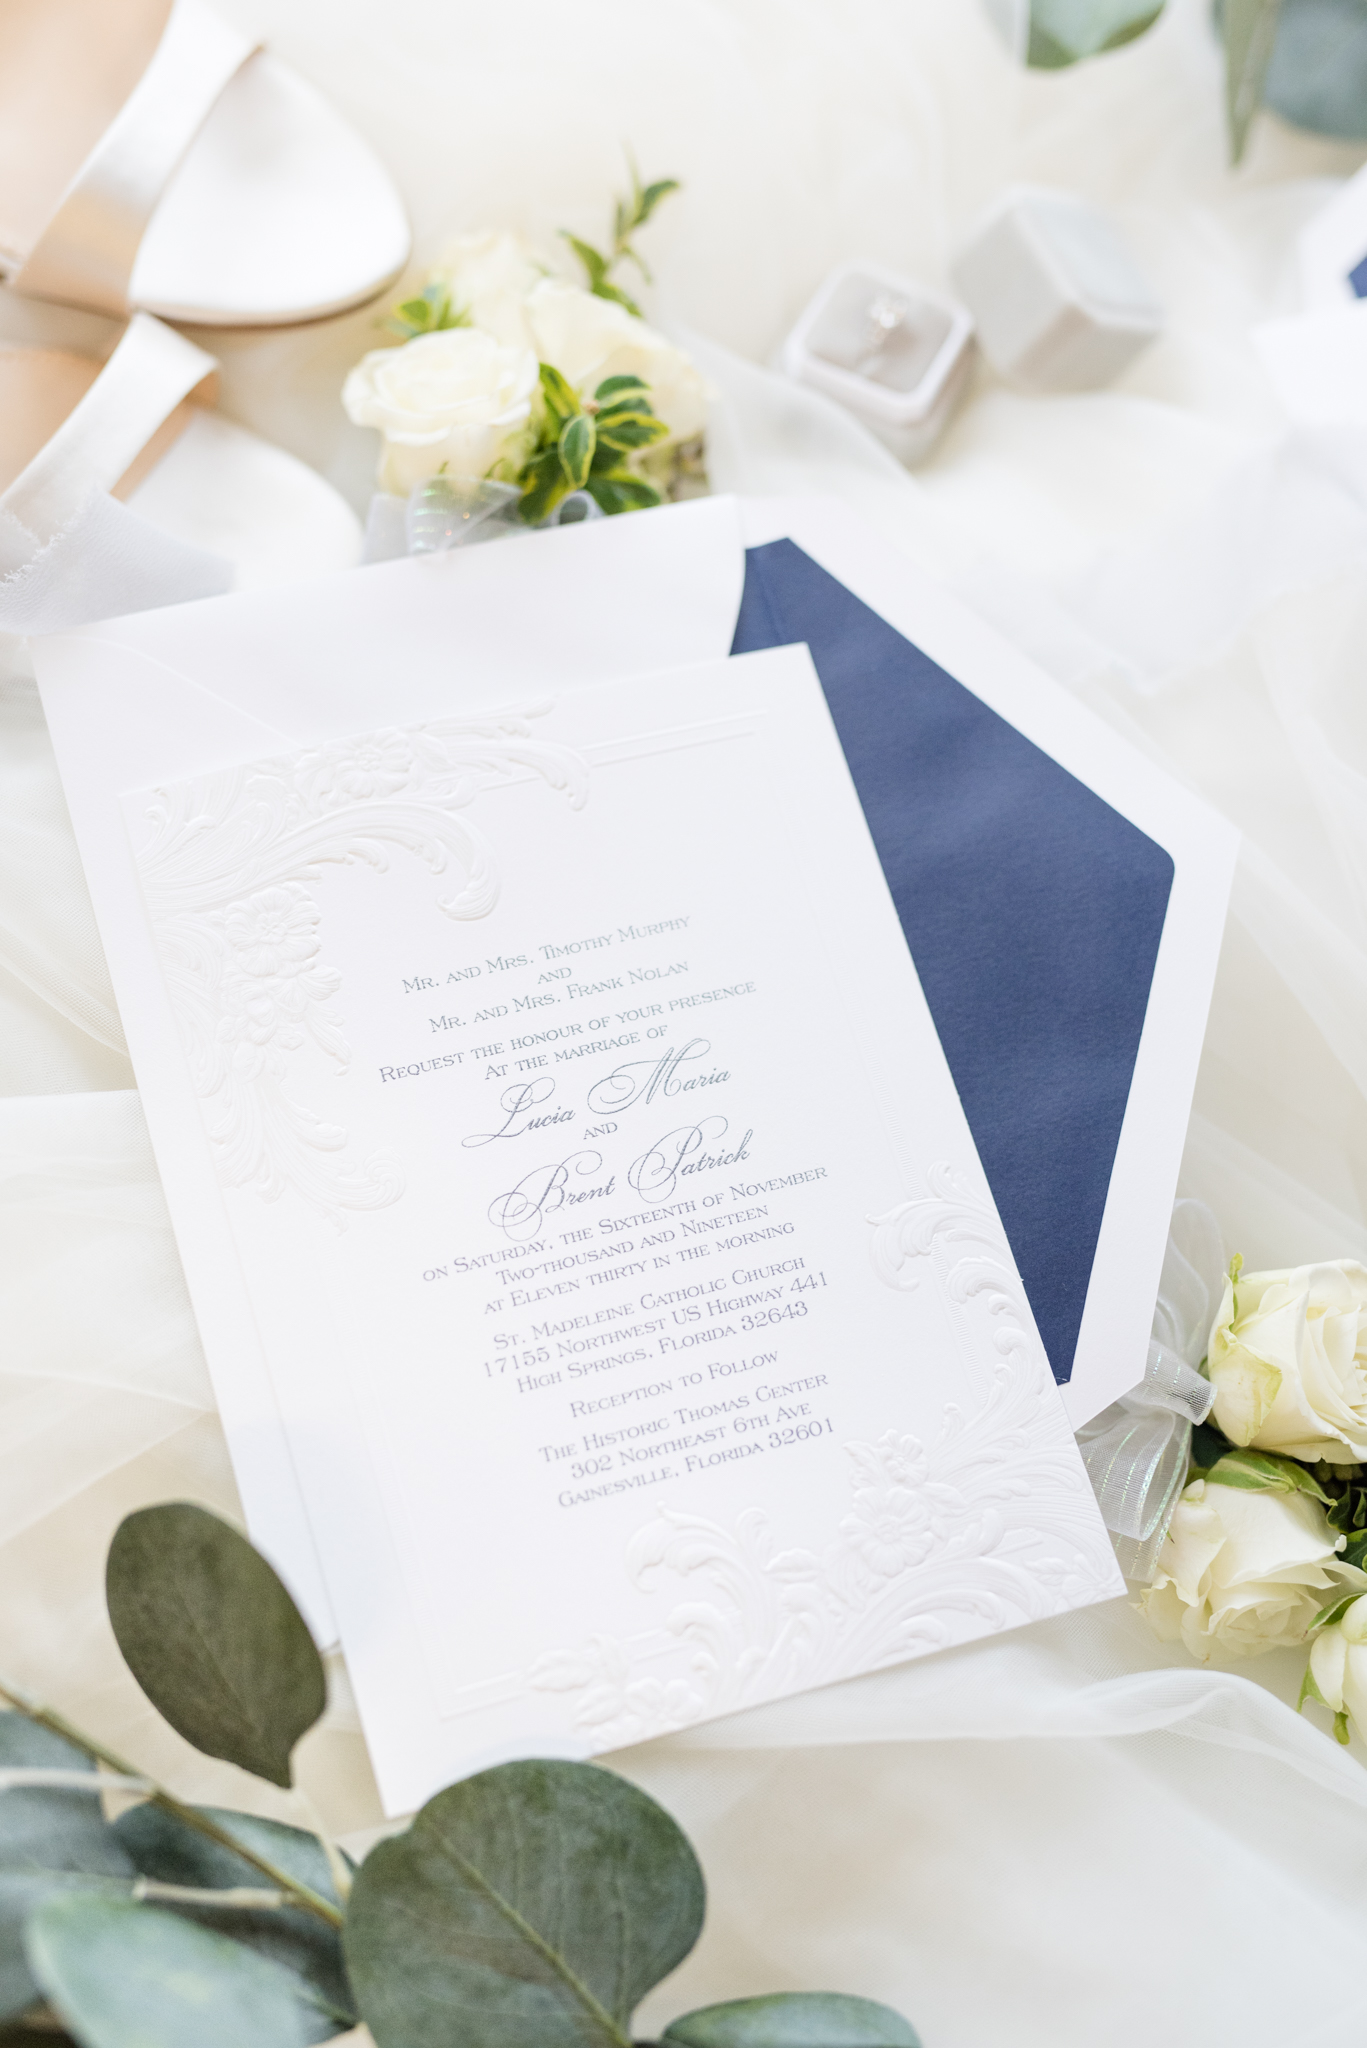 Wedding invitations with bridal details.